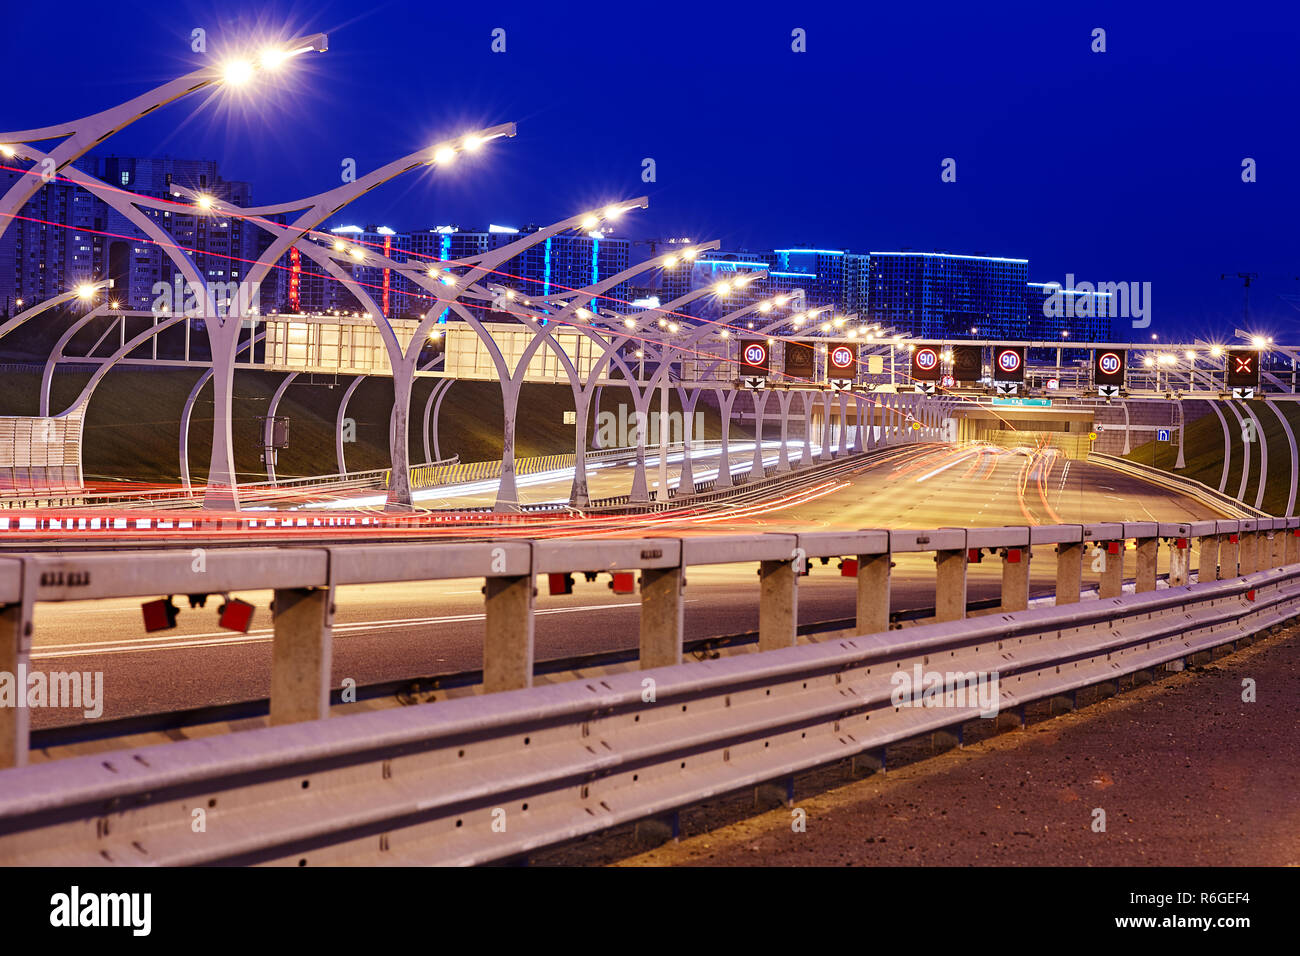 Saint Petersburg, Russia - August 24, 2018: Illuminated highway of St. Petersburg with close up of road safety barrier and  street lighting at night. Stock Photo